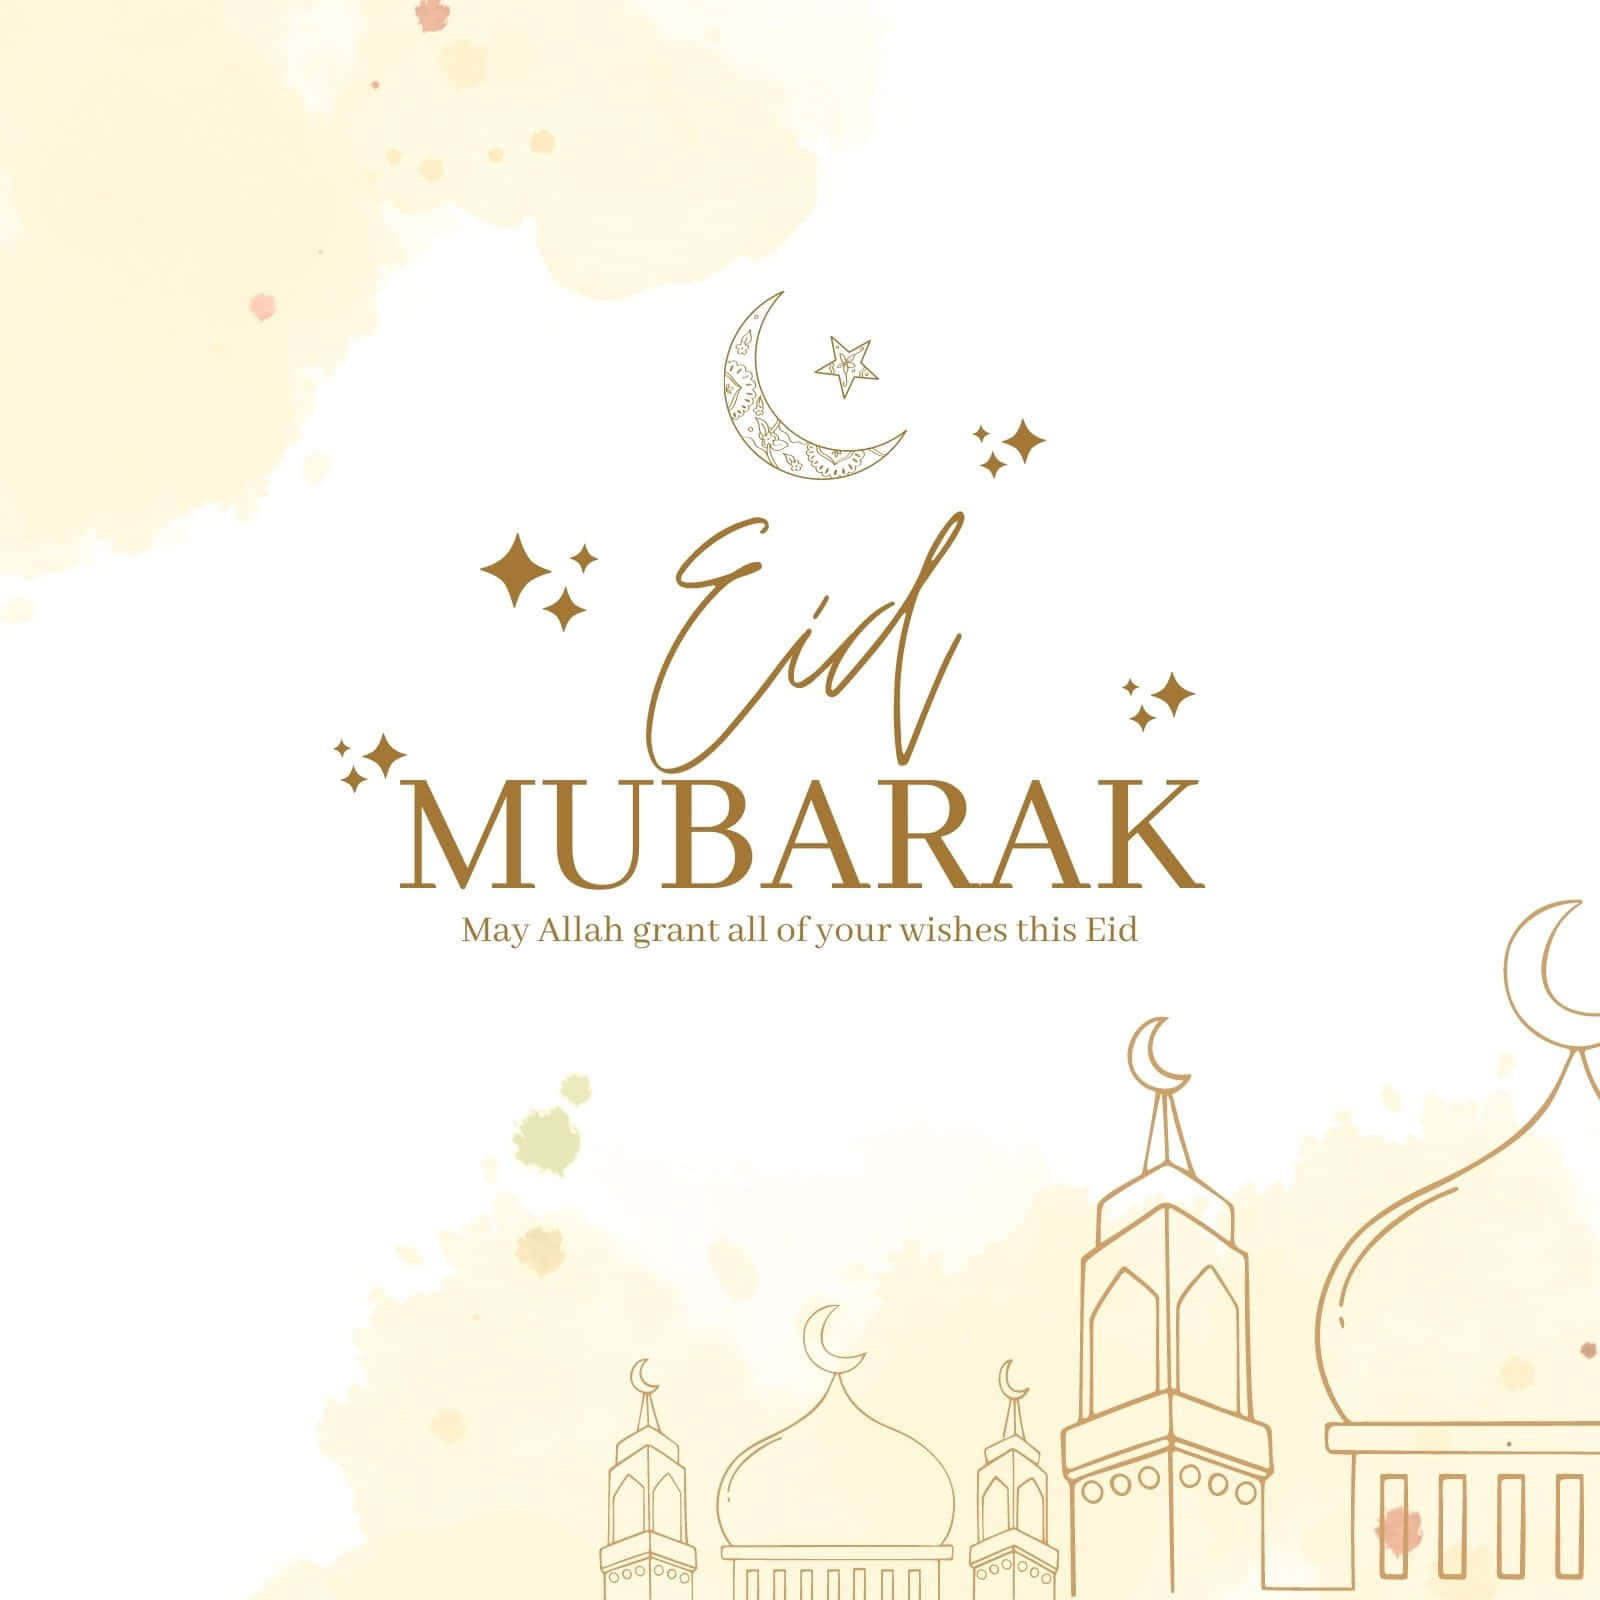 "Celebrate with your loved ones this Eid Mubarak!"